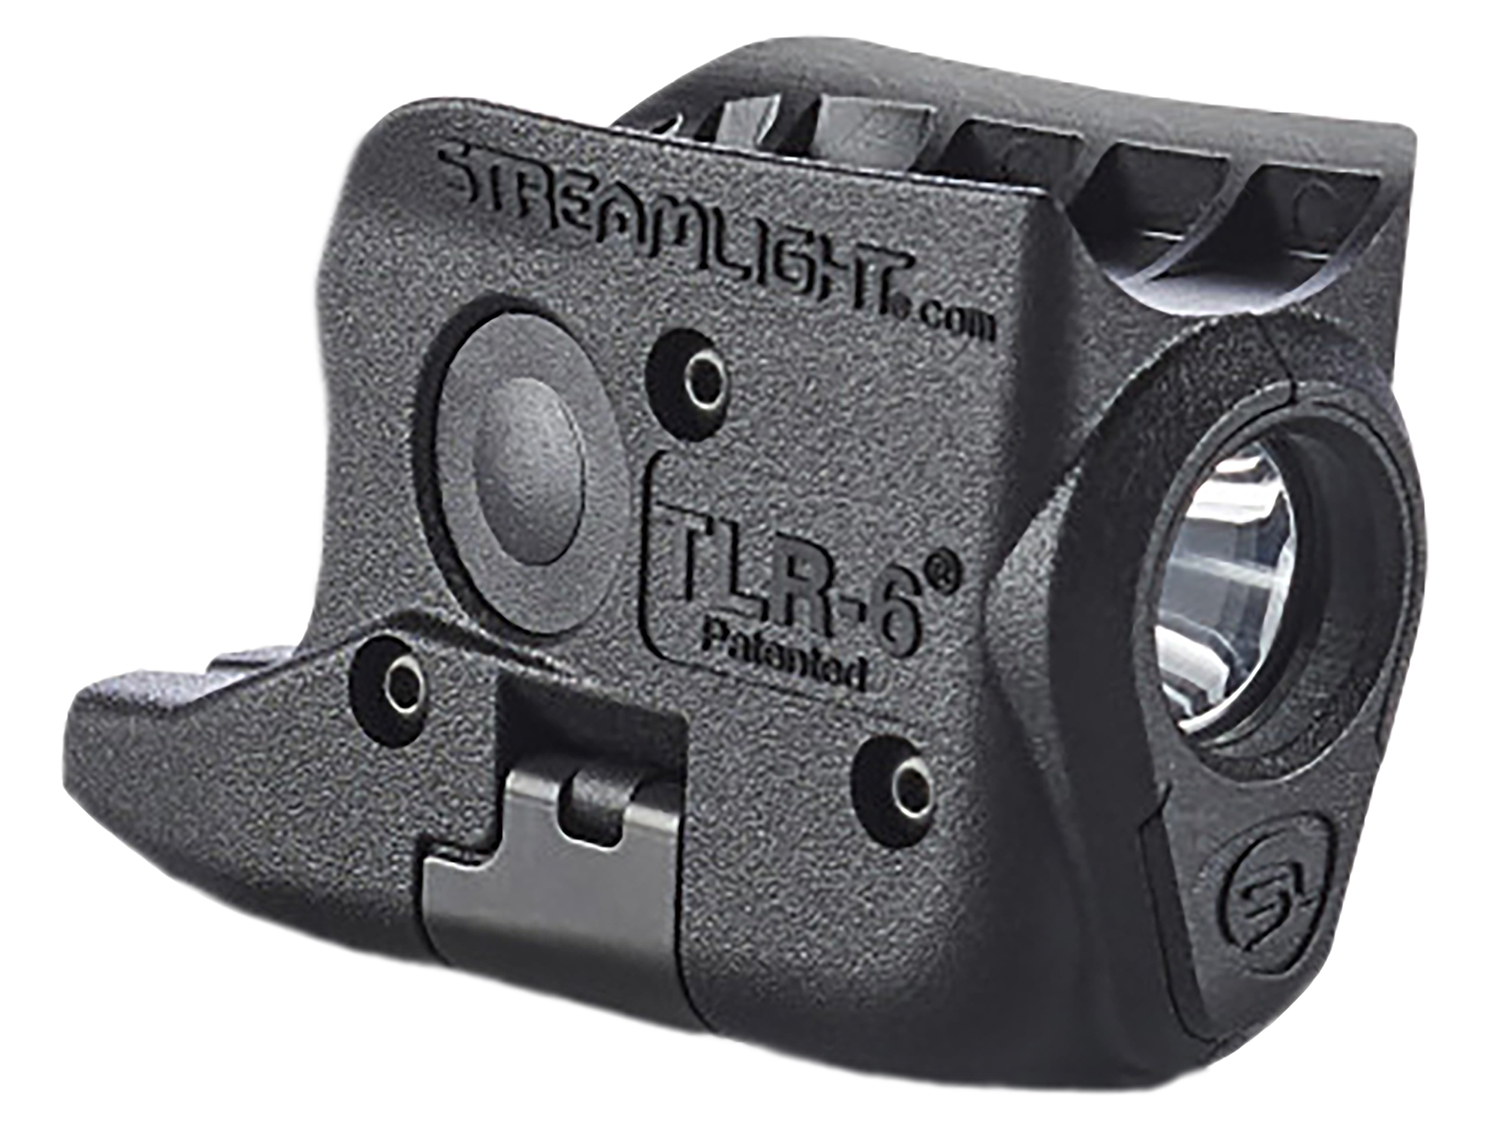 Streamlight 69272 TLR-6 Weapon Light w/red Laser Compatible w/Glock 26/27/33